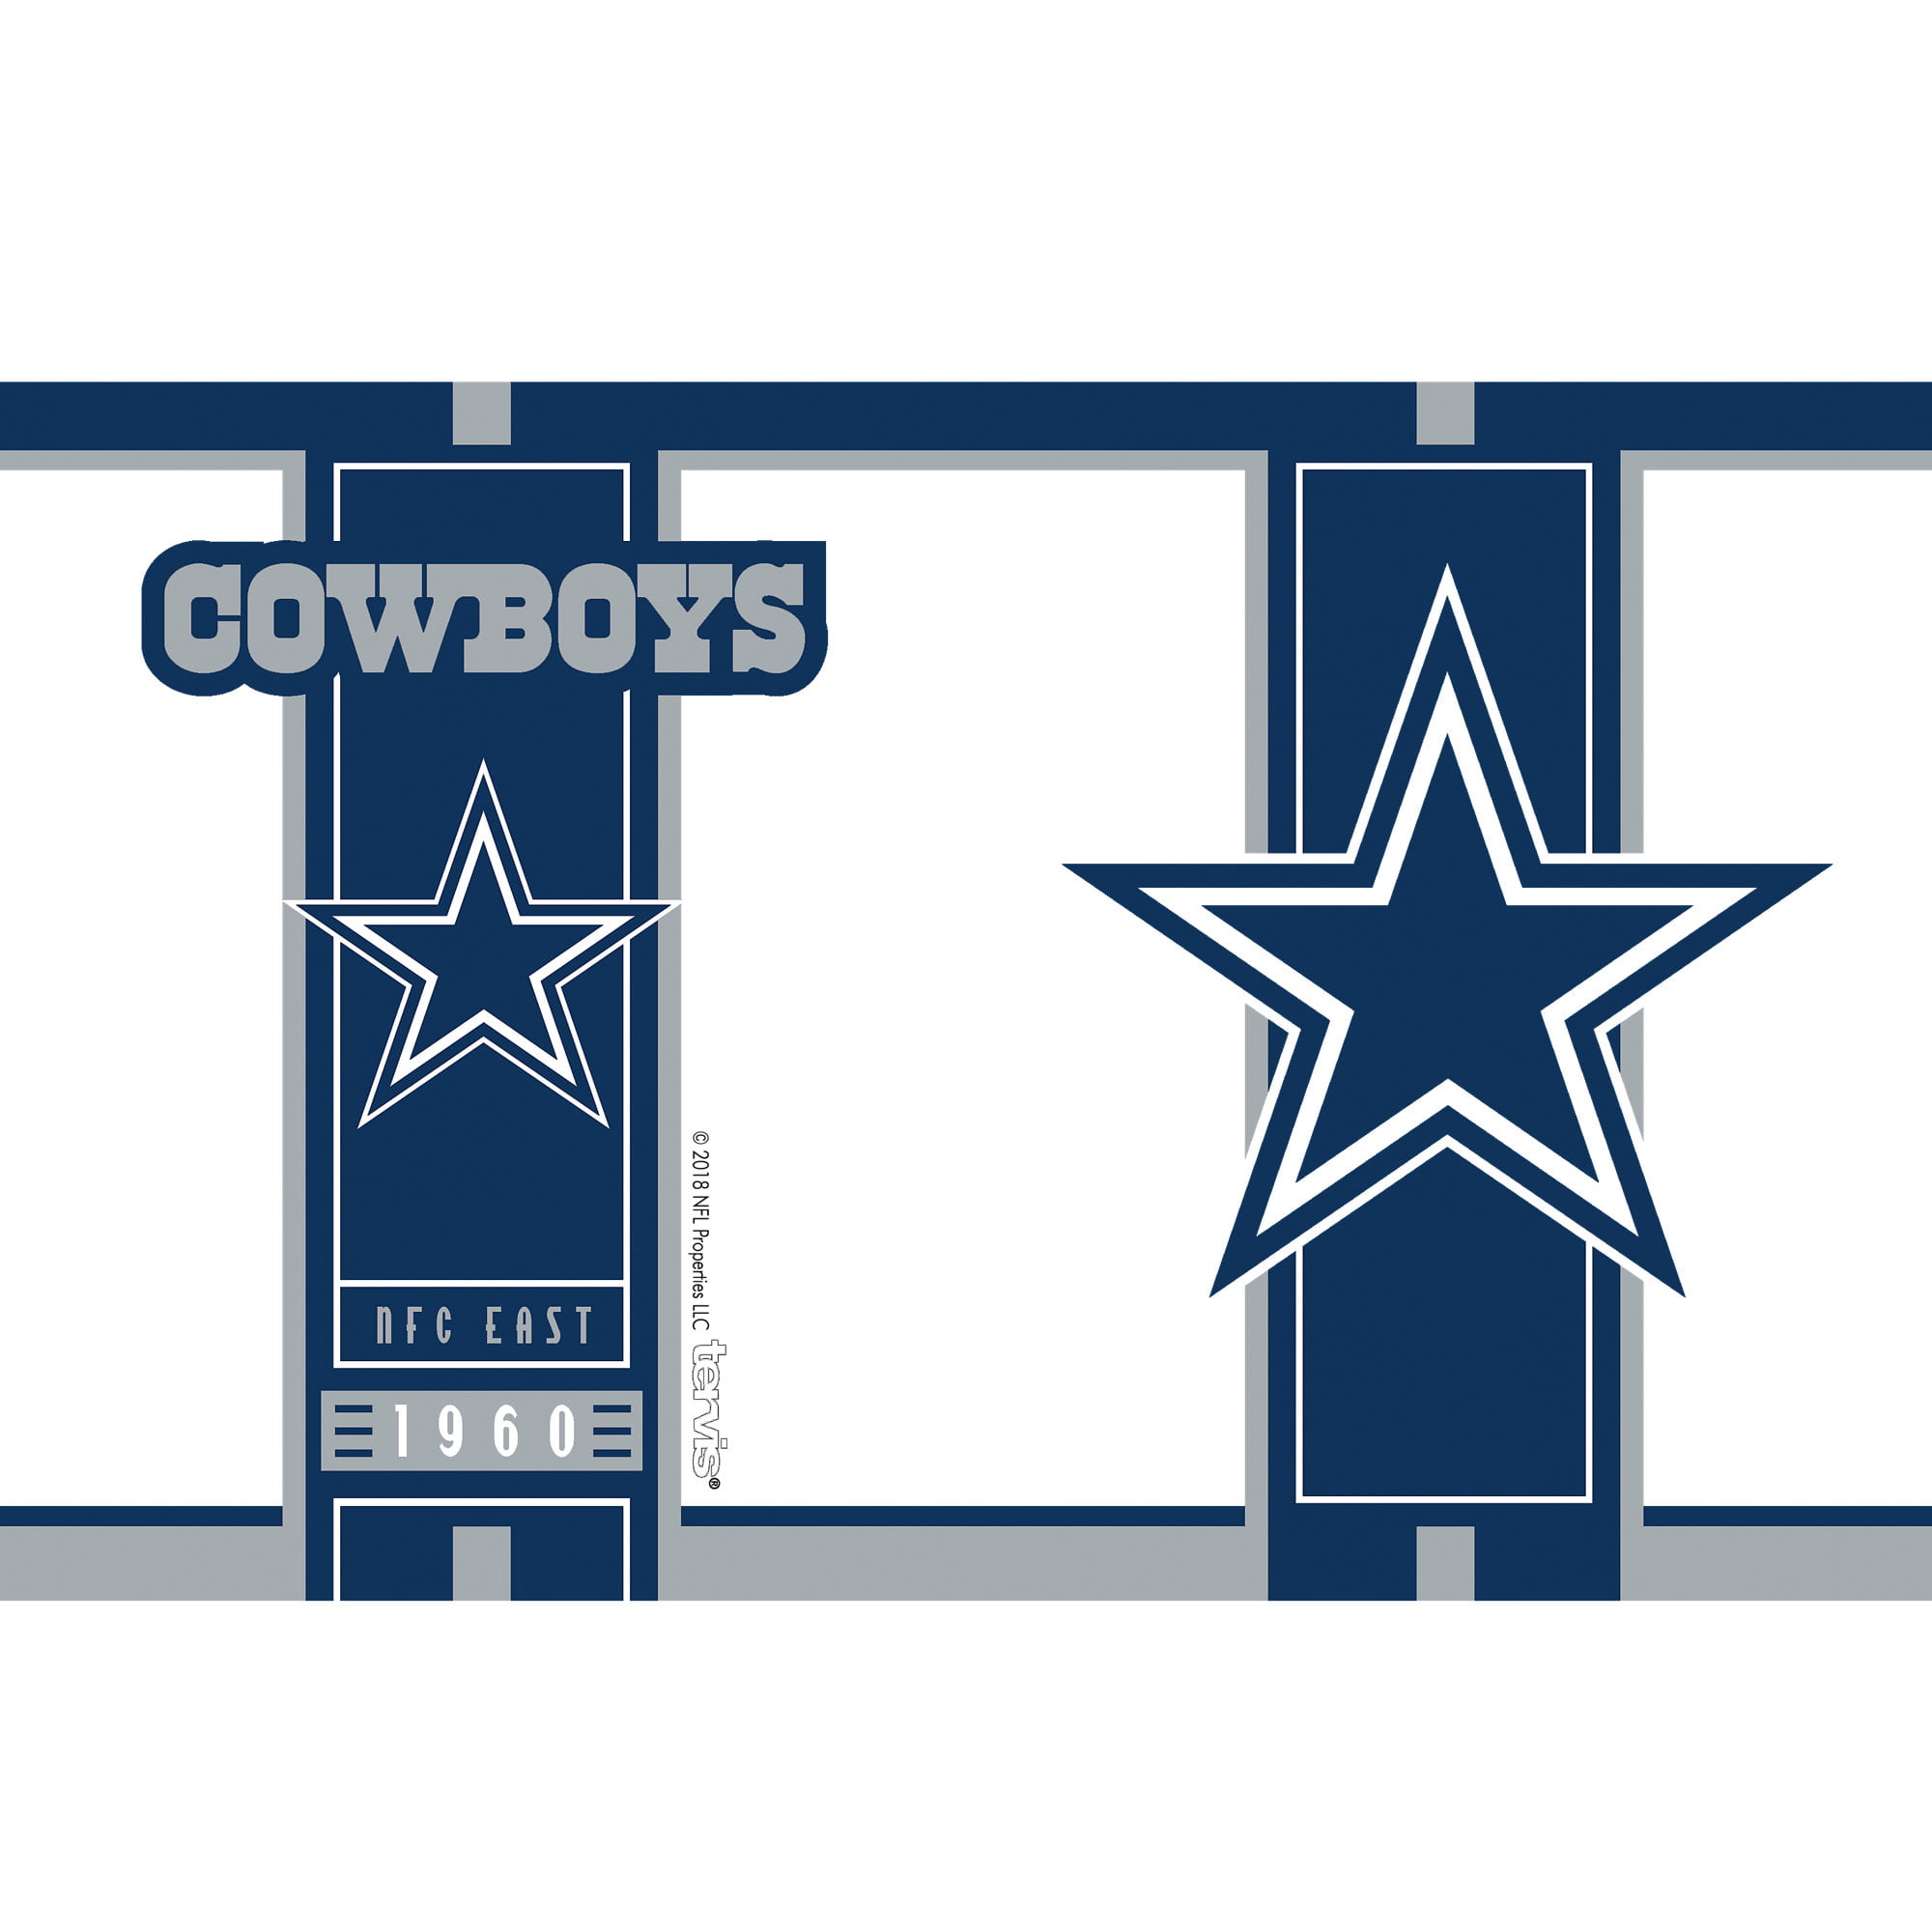 Tervis NFL® Dallas Cowboys Insulated Tumbler 